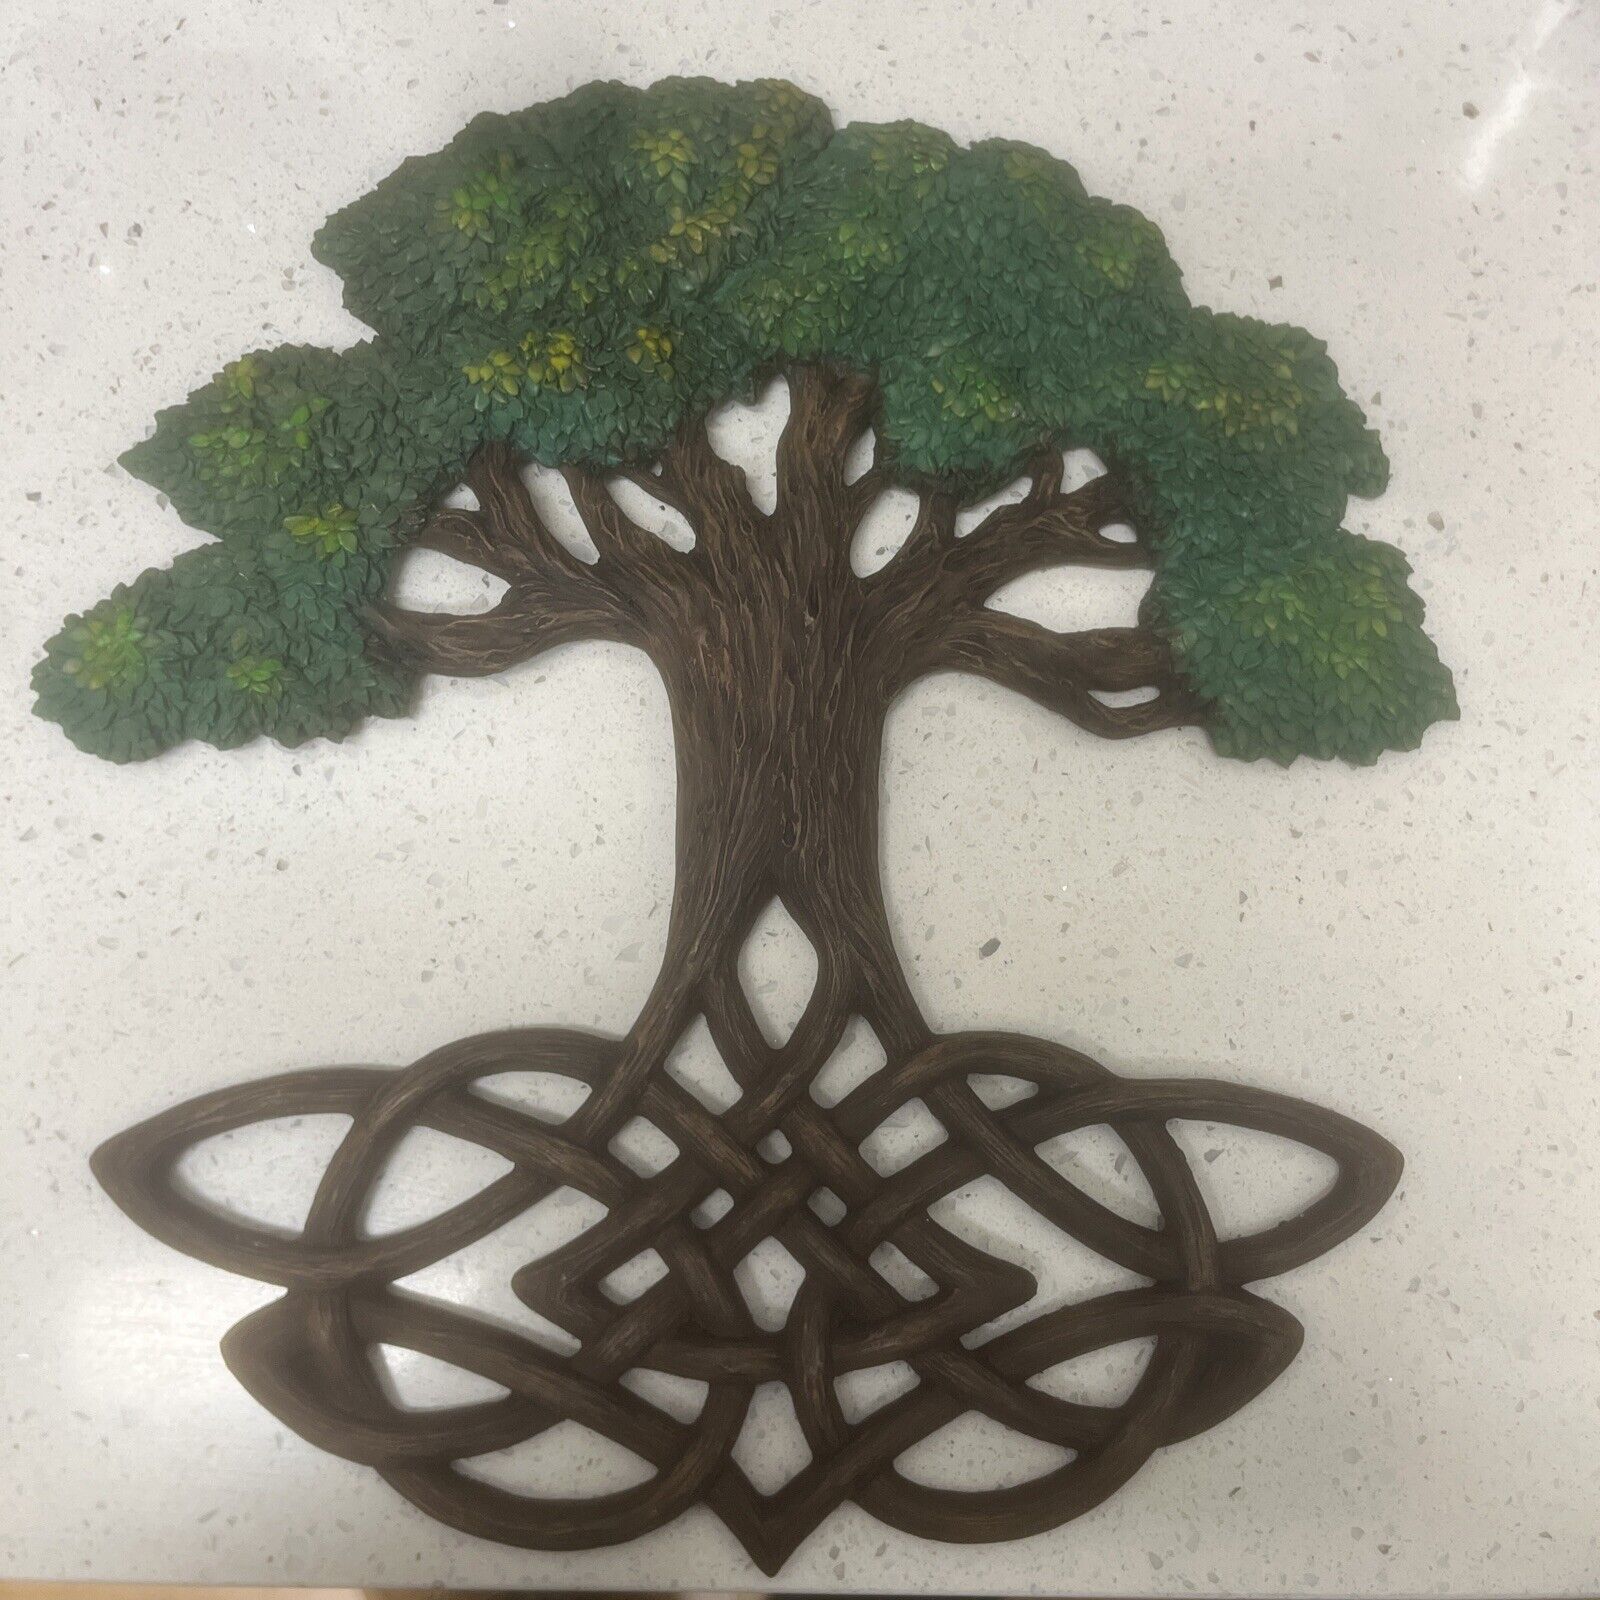 Celtic Tree of Life Yggdrasil - Knotwork Roots Decorative Wall Plaque Decor-13”